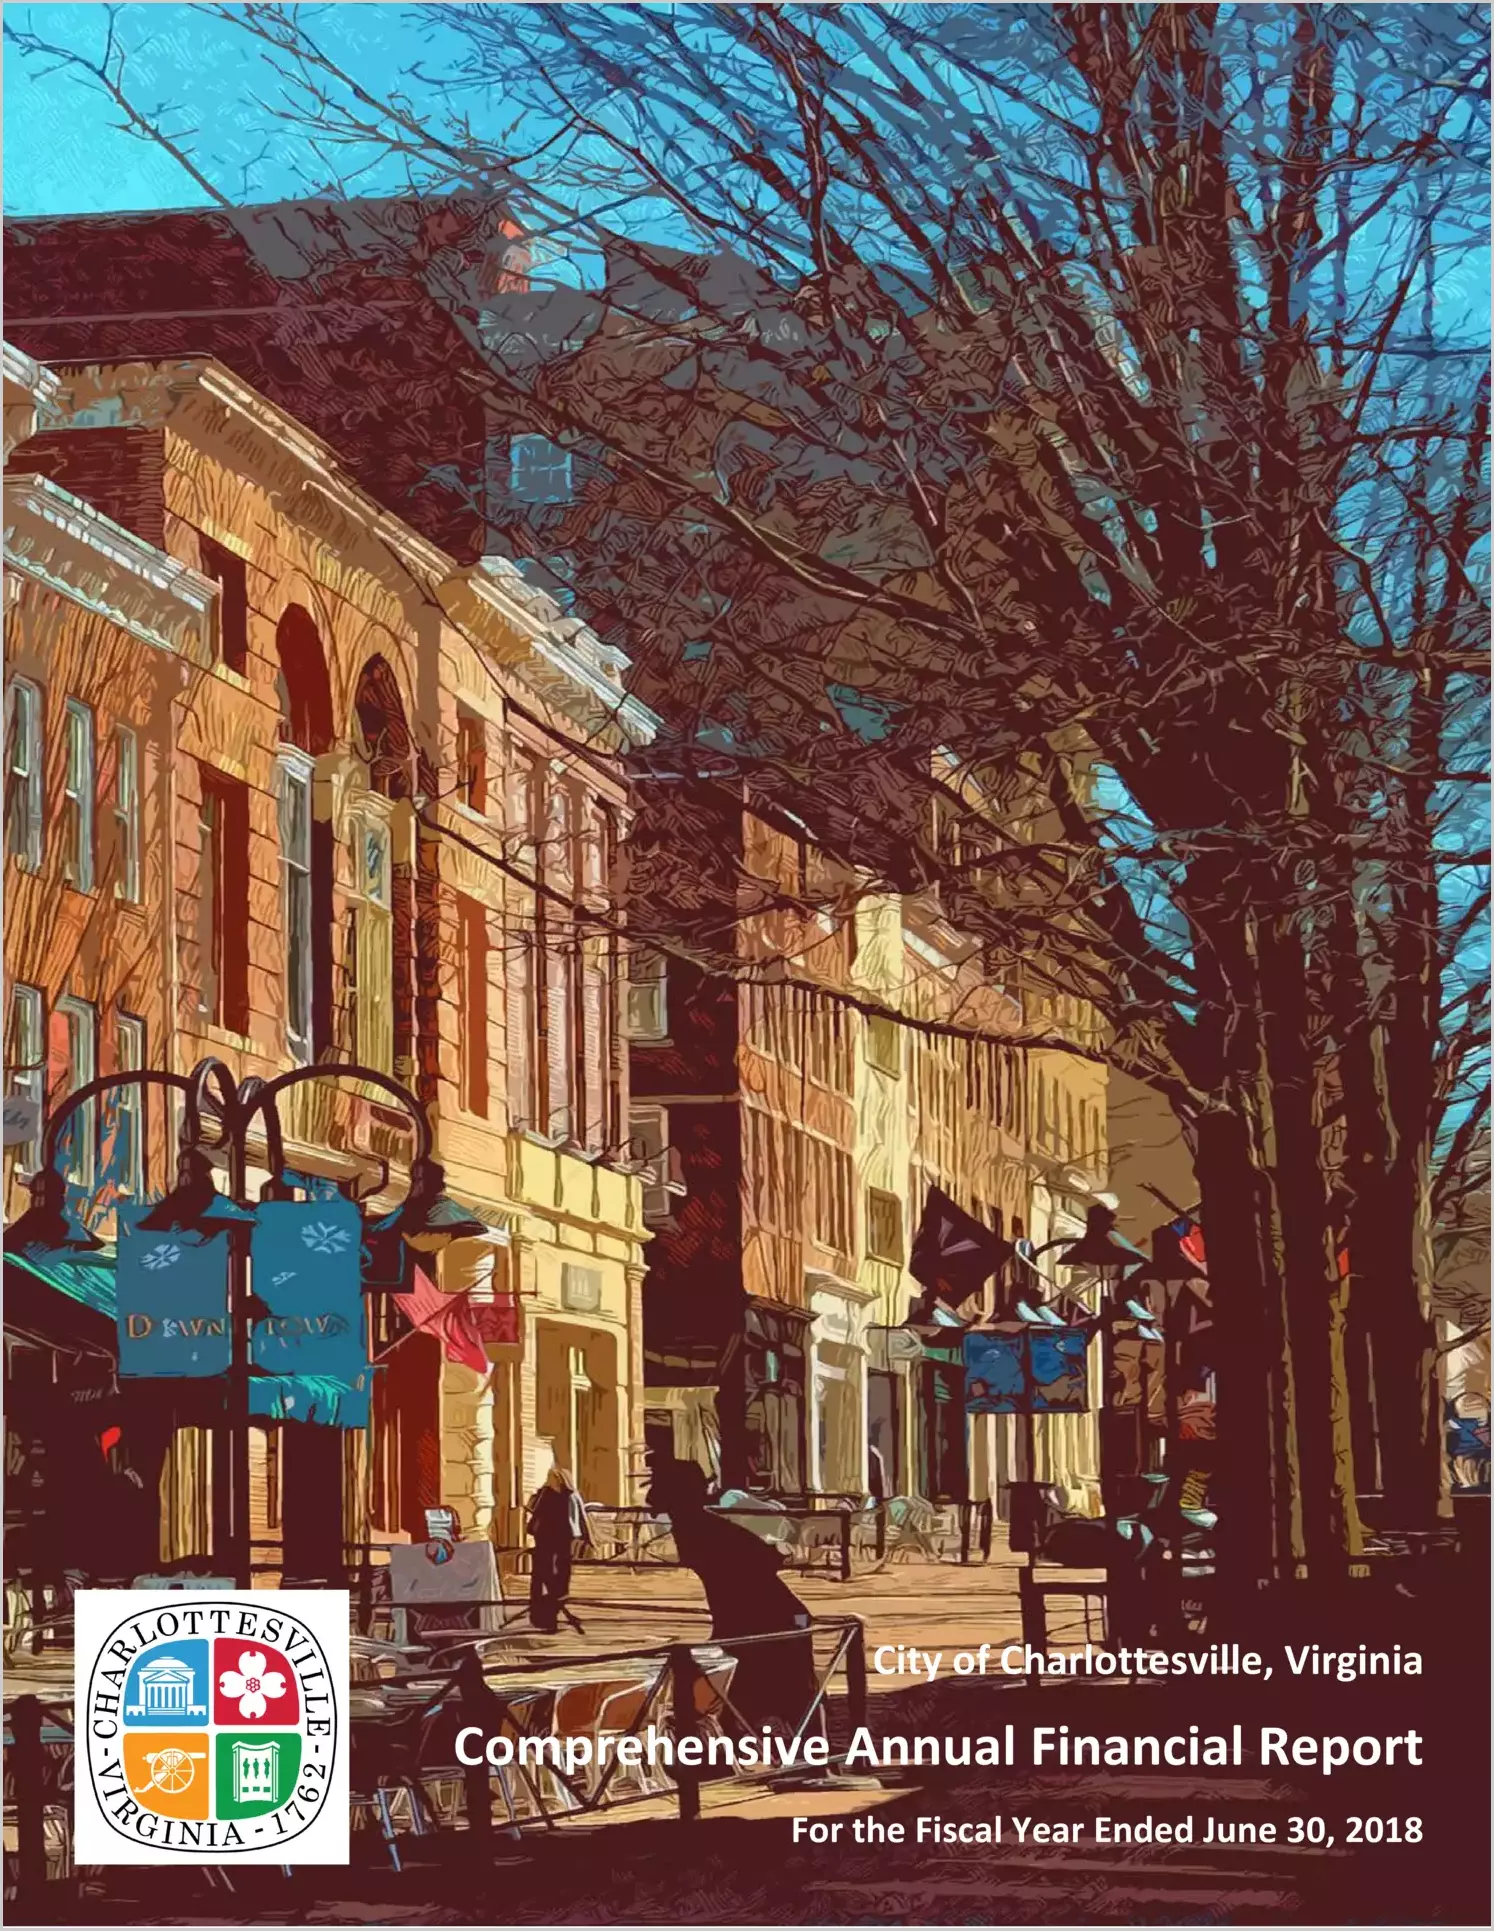 2018 Annual Financial Report for City of Charlottesville